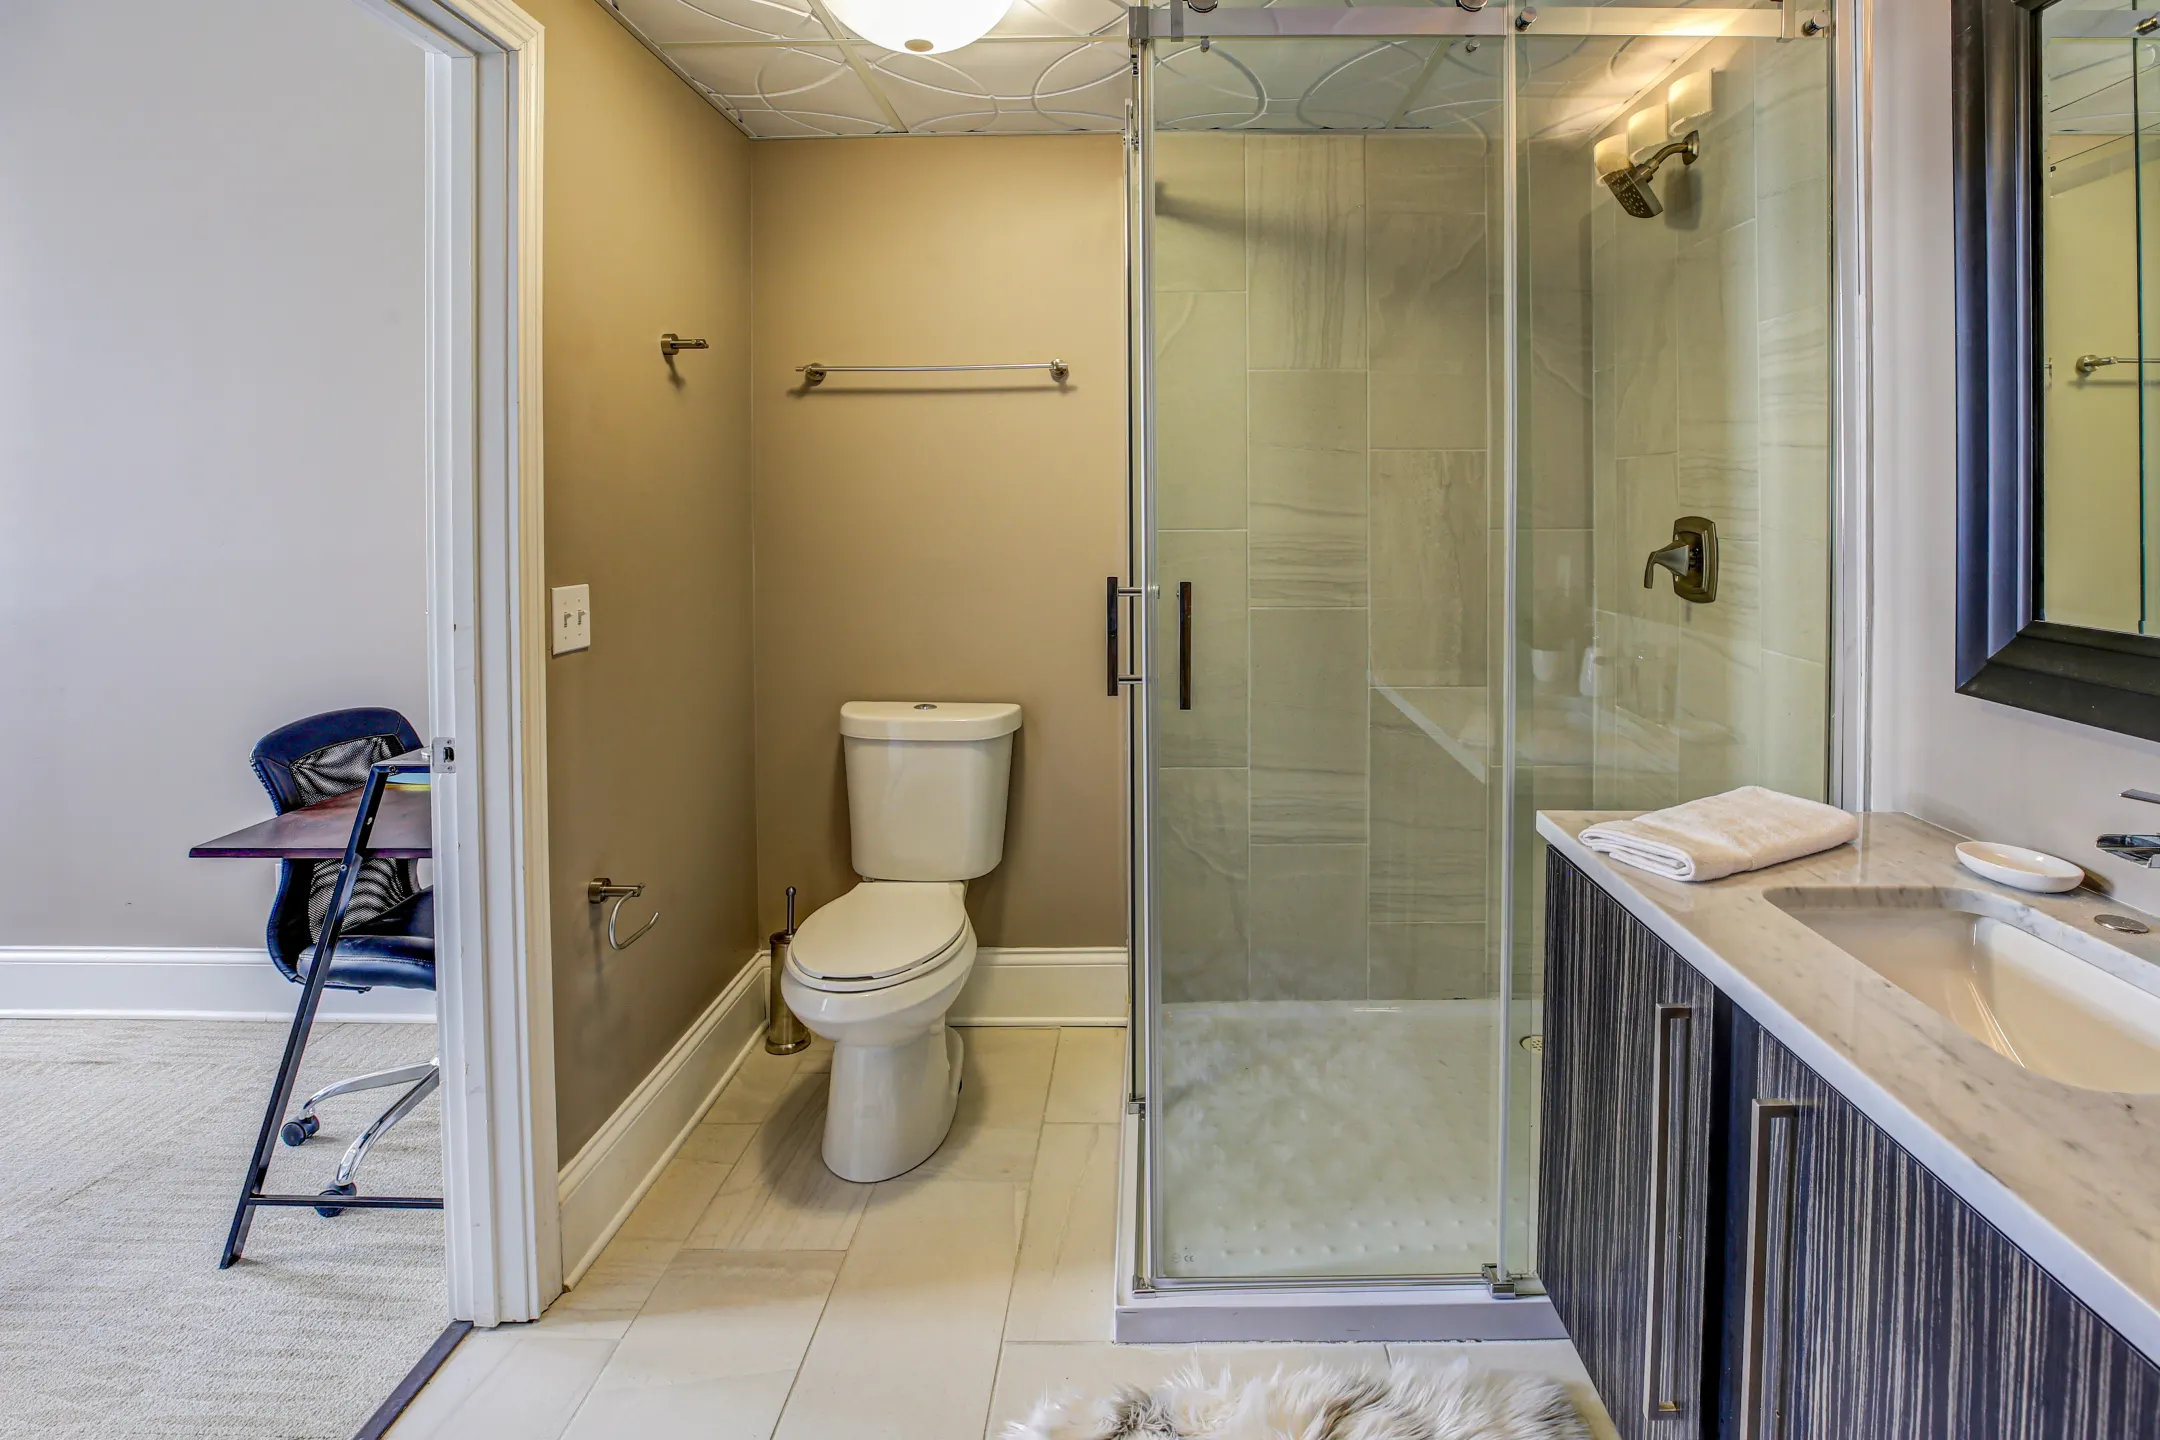 Bathroom - McCurdy Apartments - Evansville, IN